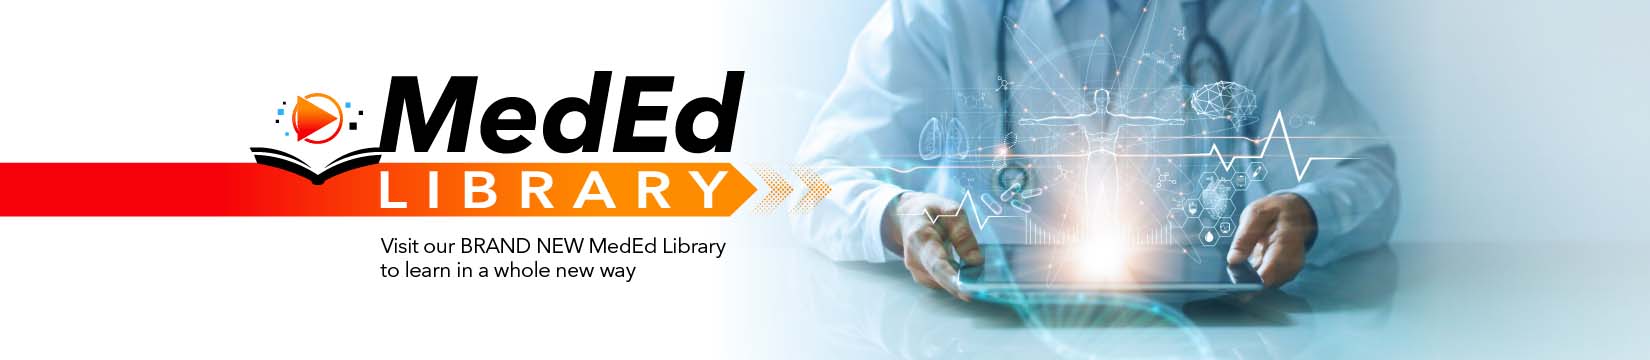 MedEd Library